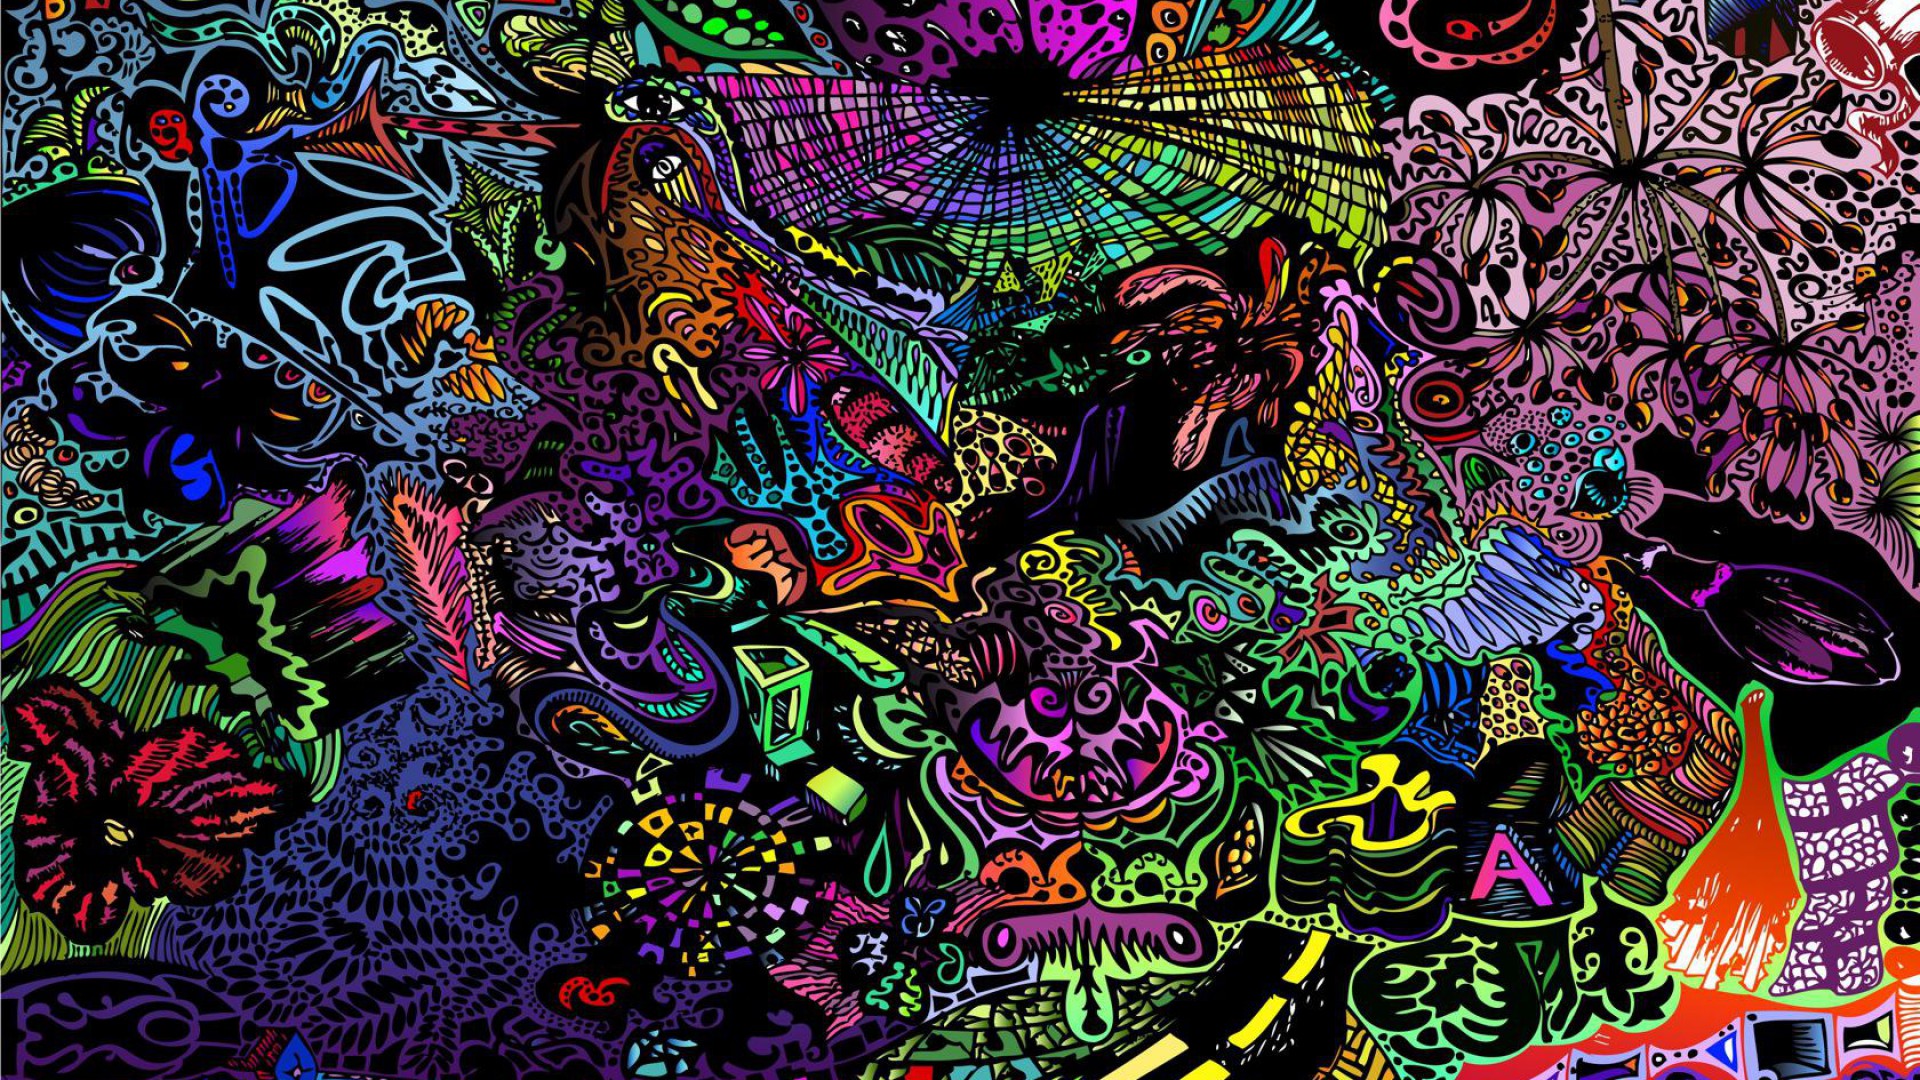 Psychedelic Abstract Art - ID: 88766